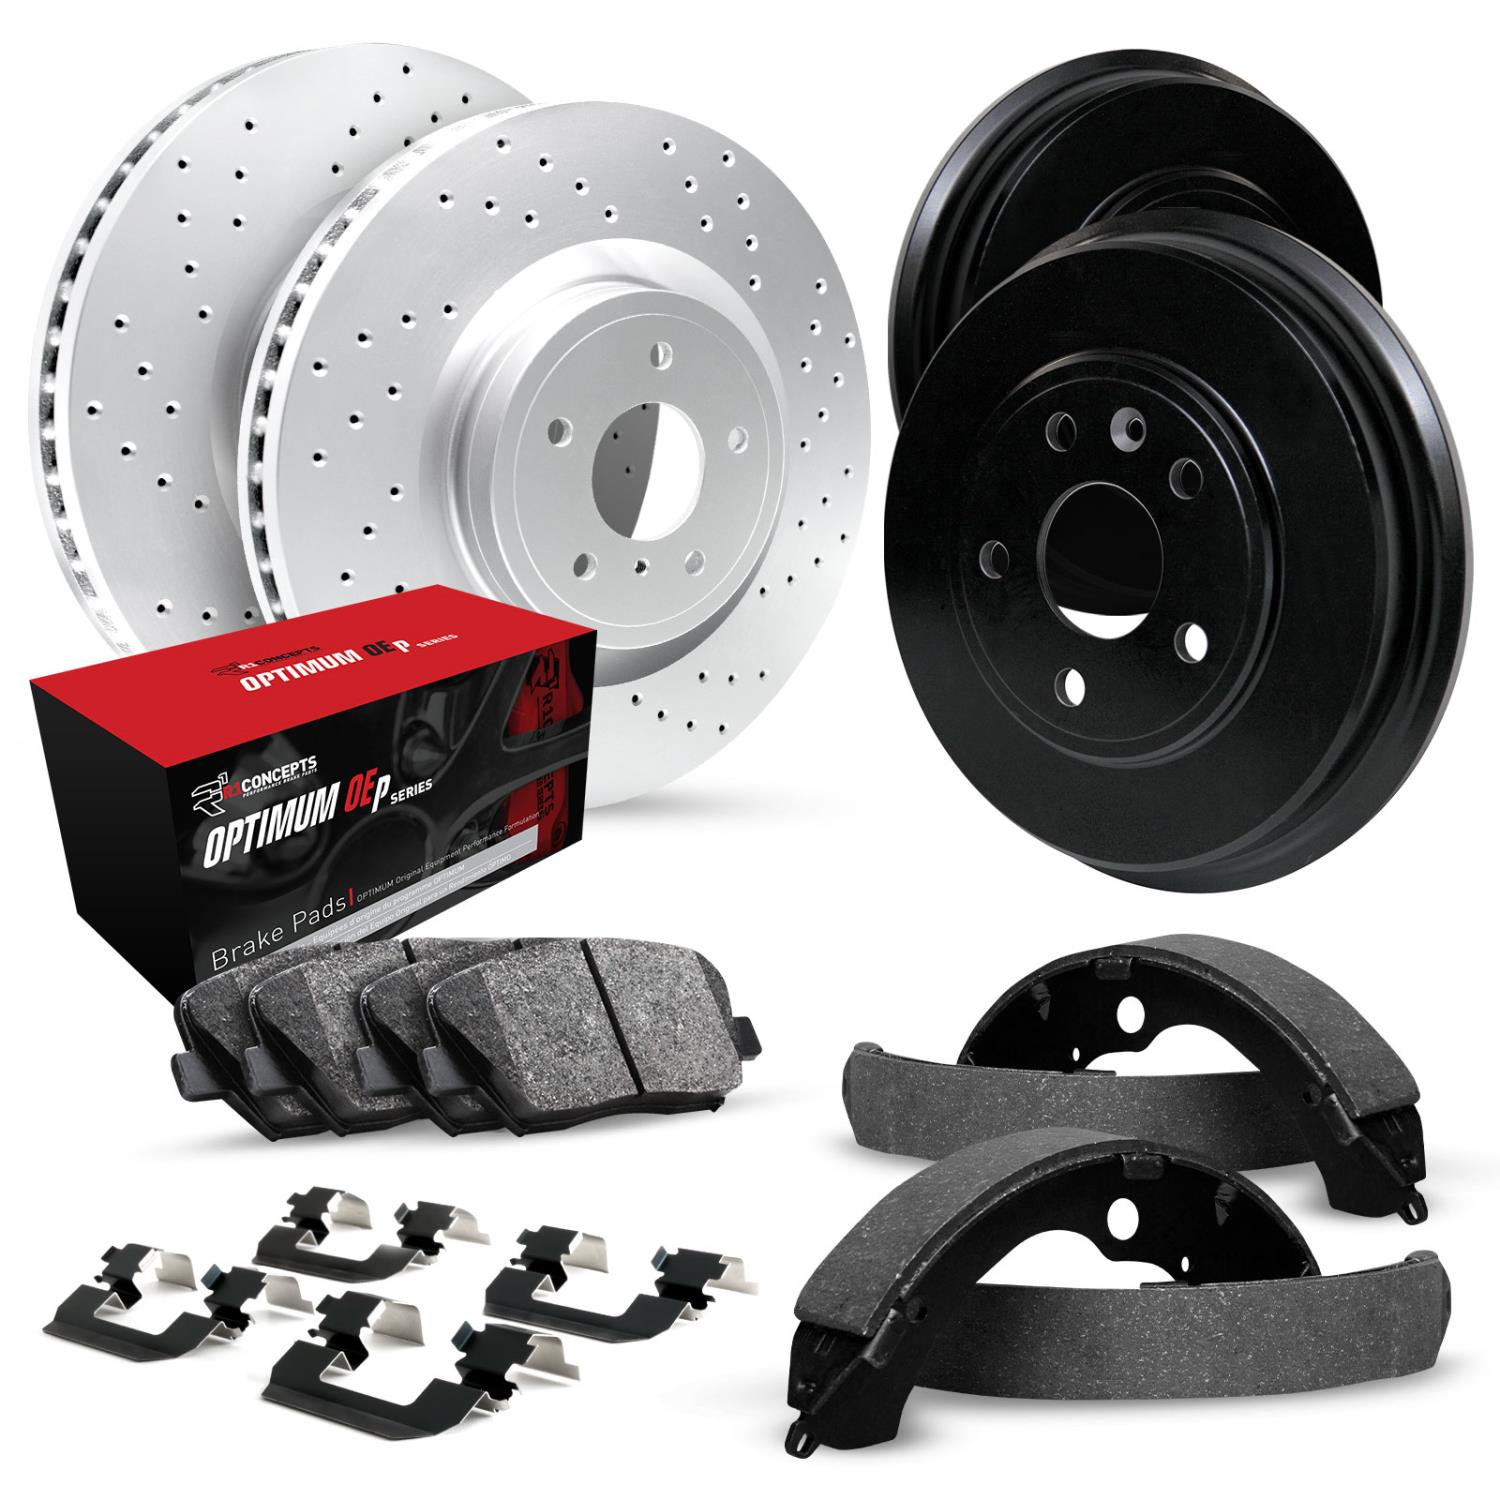 GEO-Carbon Drilled Brake Rotor & Drum Set w/Optimum OE Pads, Shoes, & Hardware, 2008-2015 GM, Position: Front & Rear